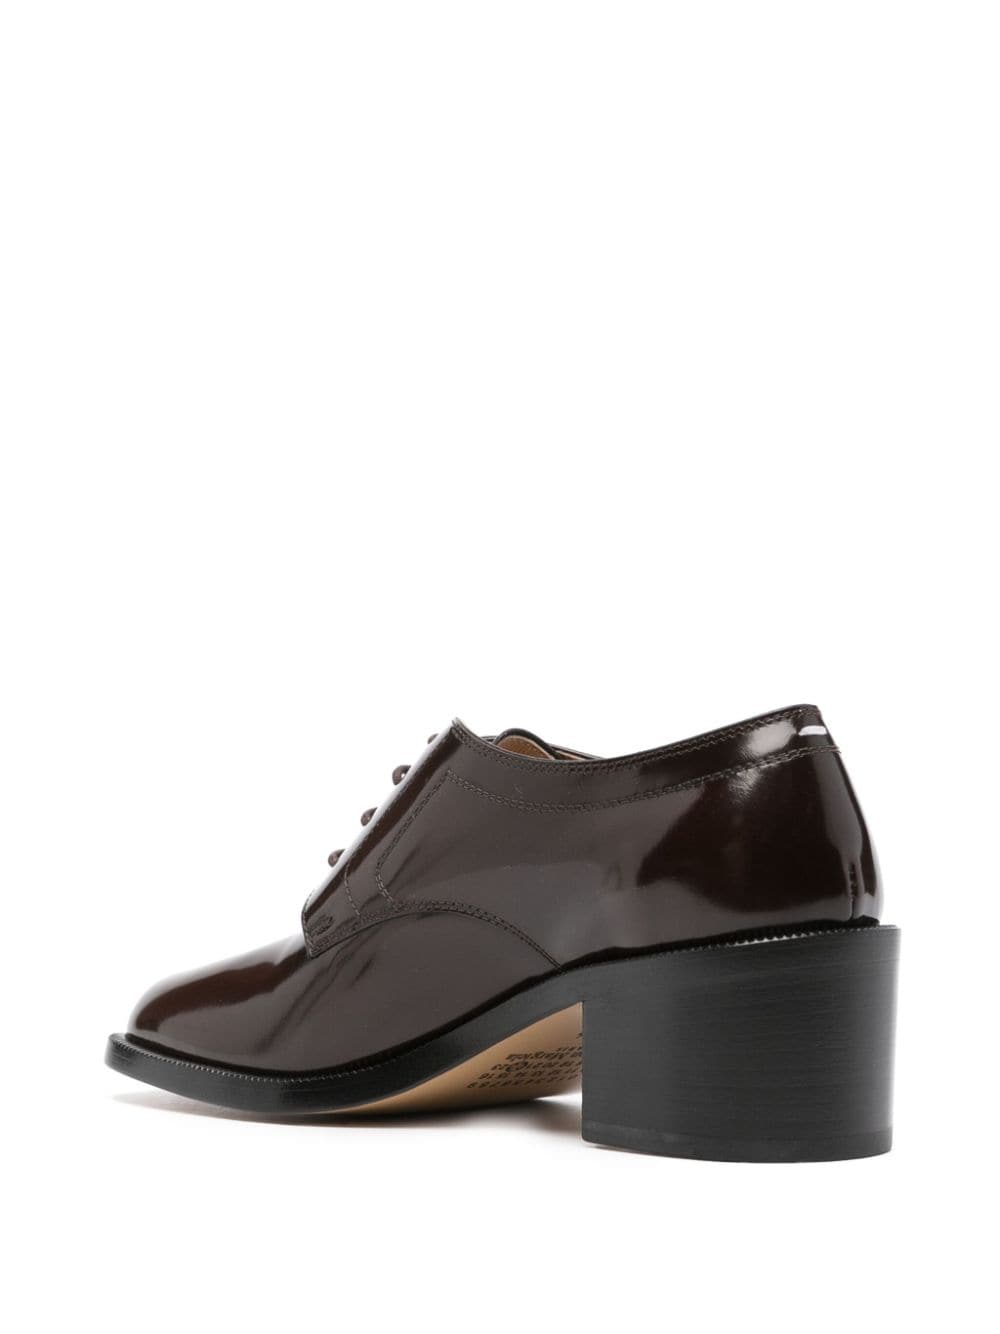 Shop Maison Margiela Tabi 60mm Leather Oxford Shoes In Brown